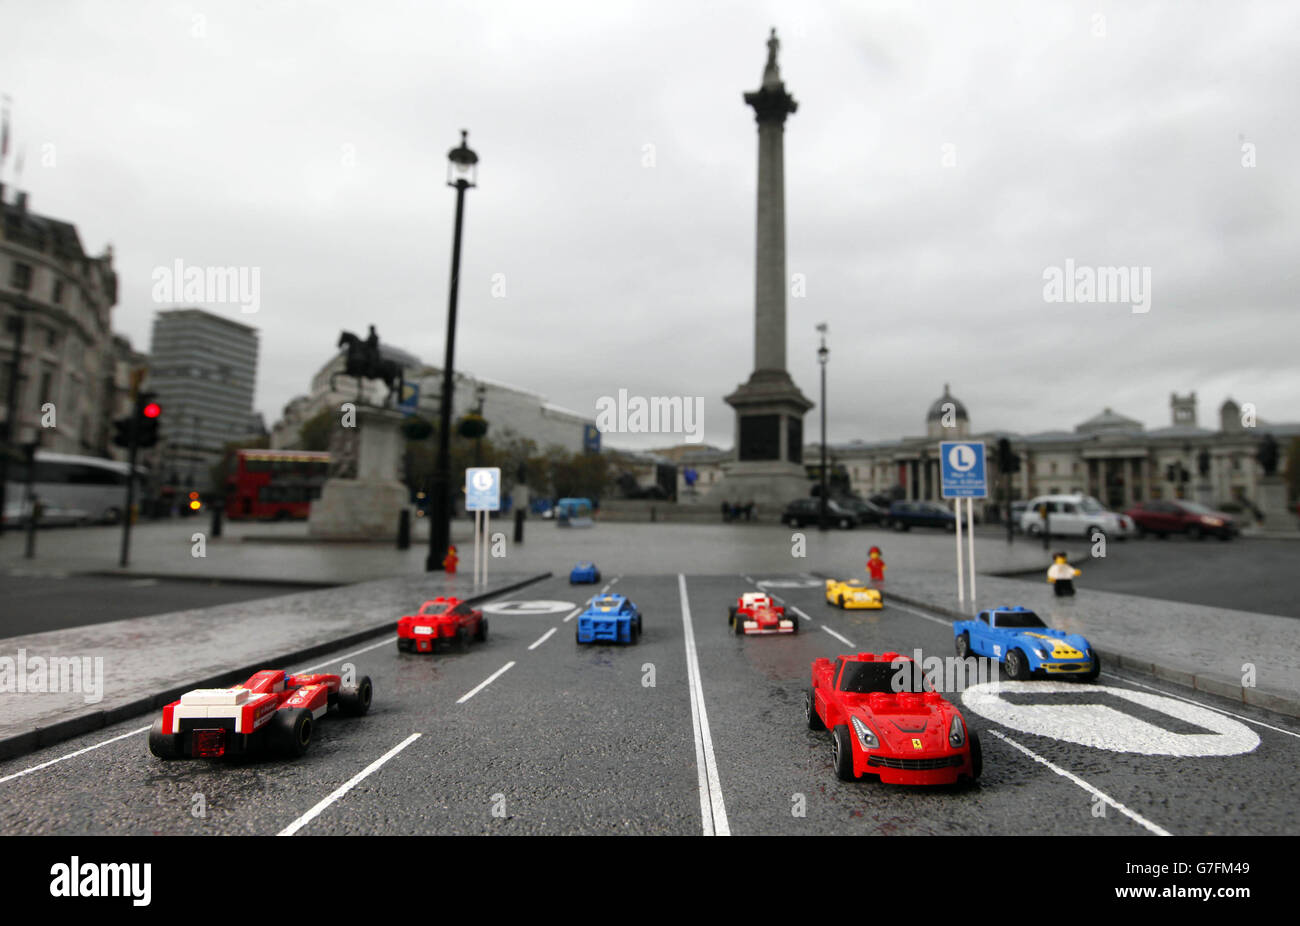 model Ferrari F138, from the new Shell V-Power LEGO Collection, uses the specially designed congestion lane for LEGO cars in Trafalgar Square in London Stock Photo - Alamy